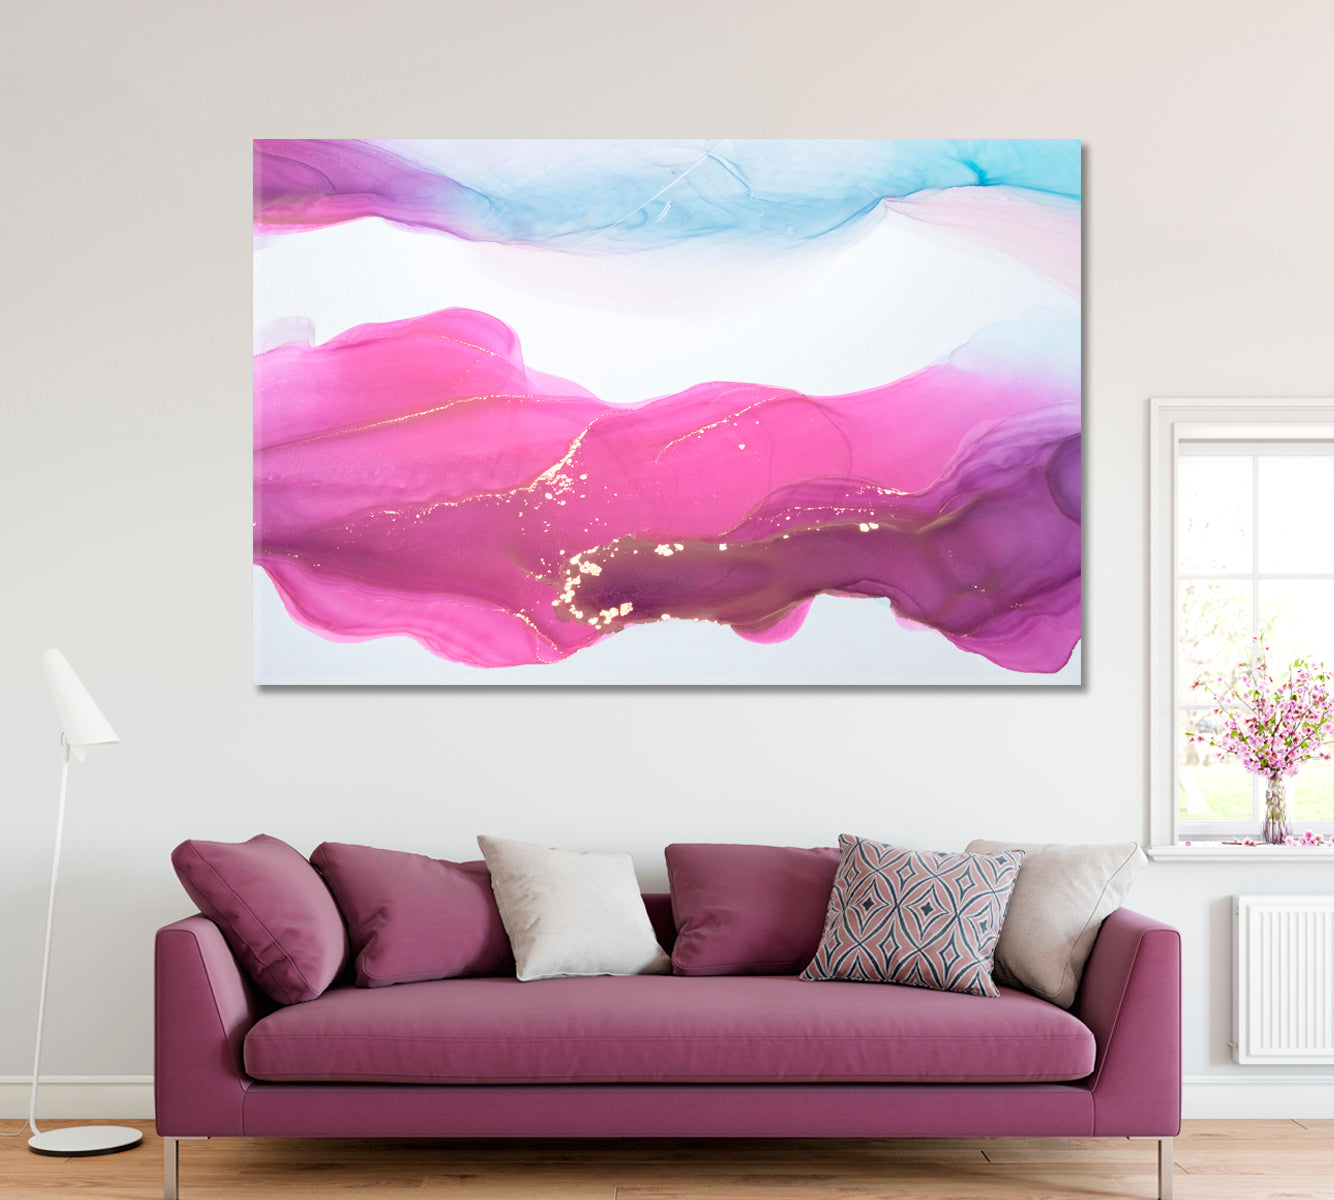 Abstract Pink Clouds Canvas Print ArtLexy 1 Panel 24"x16" inches 